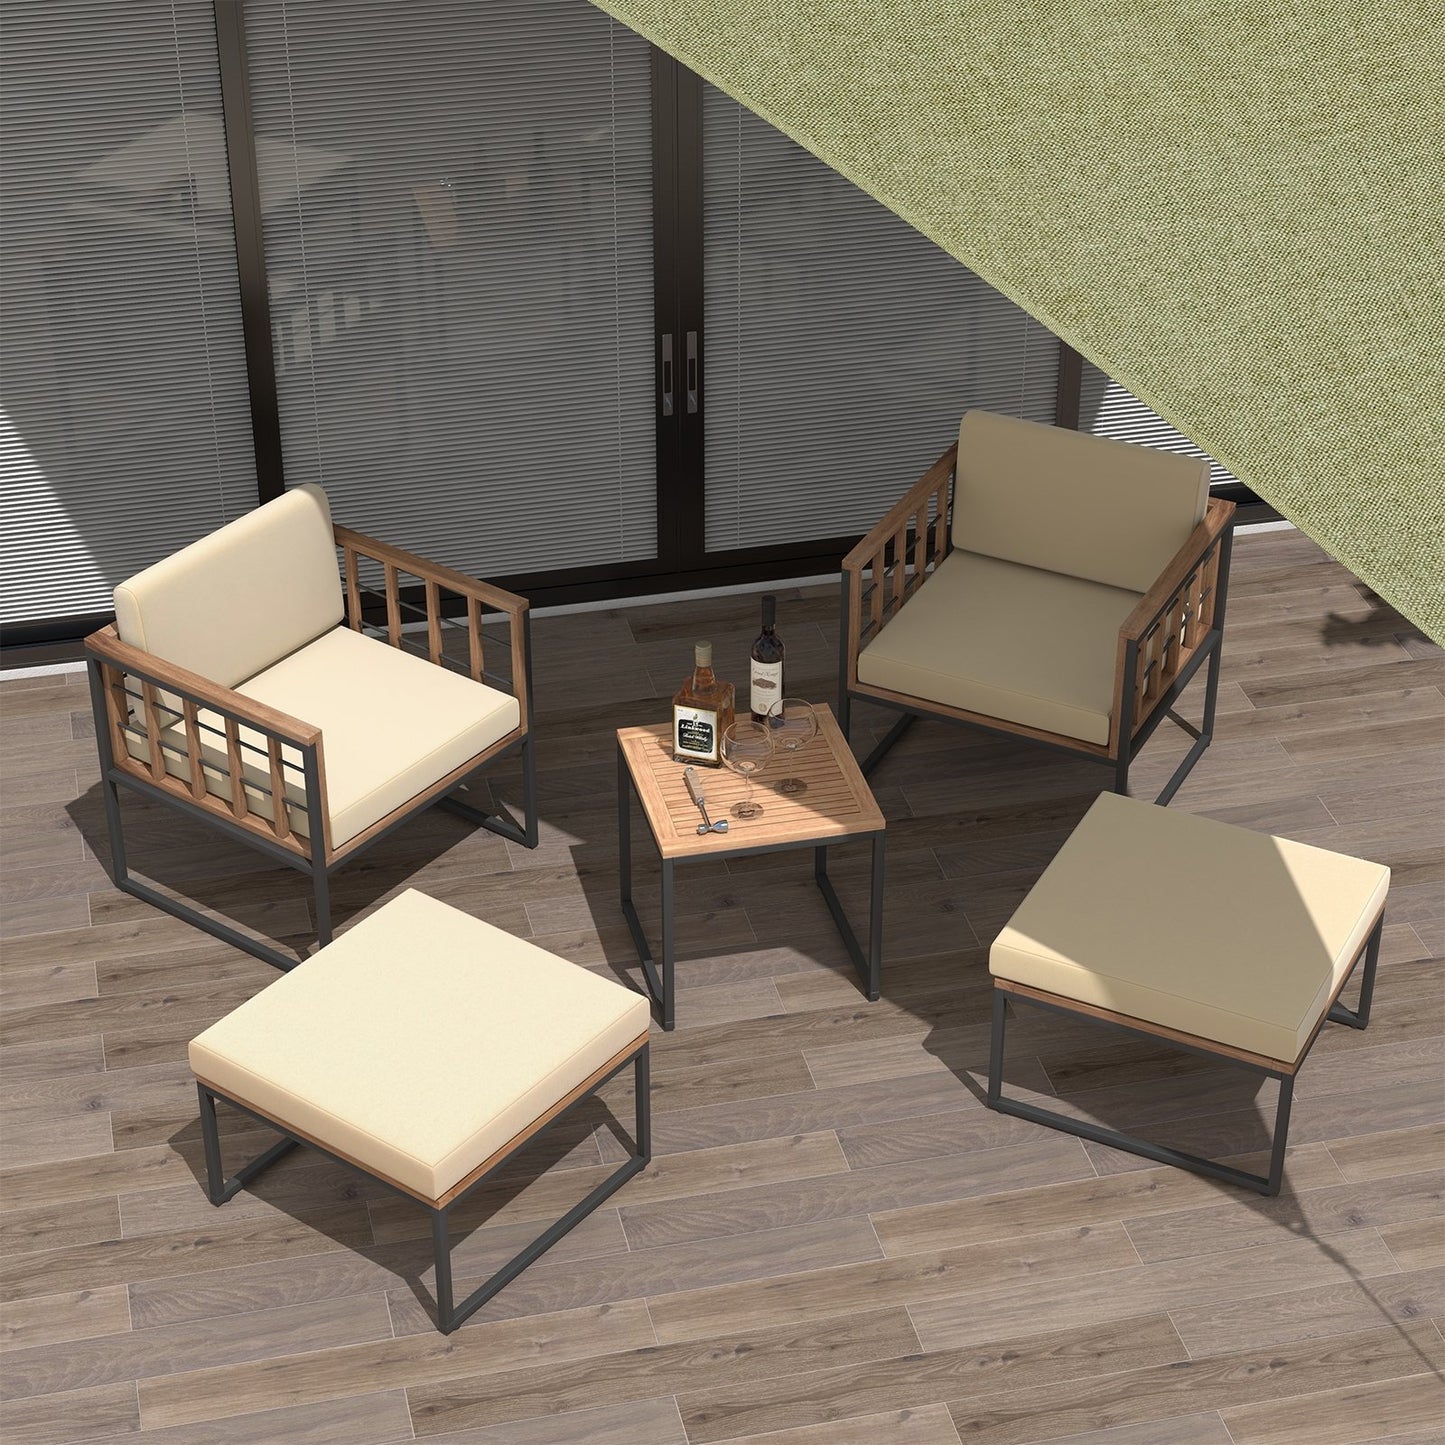 5 Piece Outdoor Furniture Set Acacia Wood Chair Set with Ottomans and Coffee Table, Beige